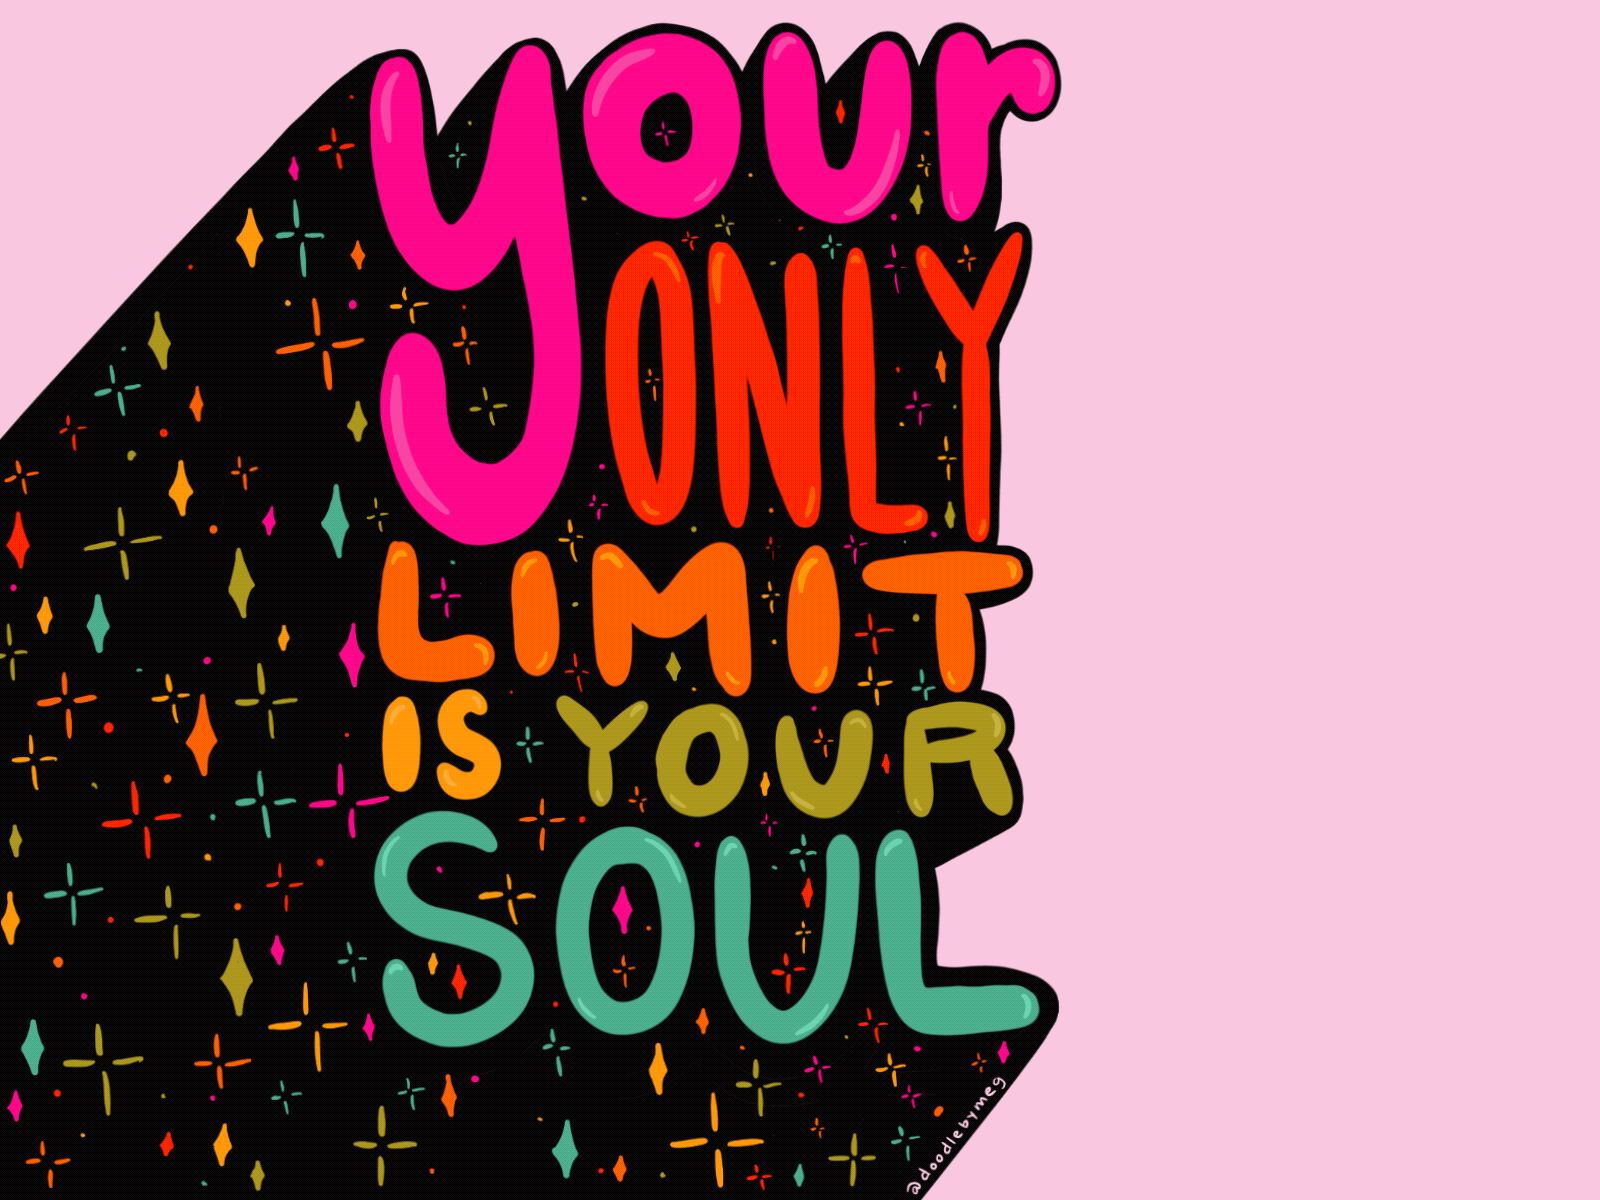 Your Soul Gif design drawing gif gif animated gif animation illustration lettering procreate procreate 5 procreate art quote retro typography vintage